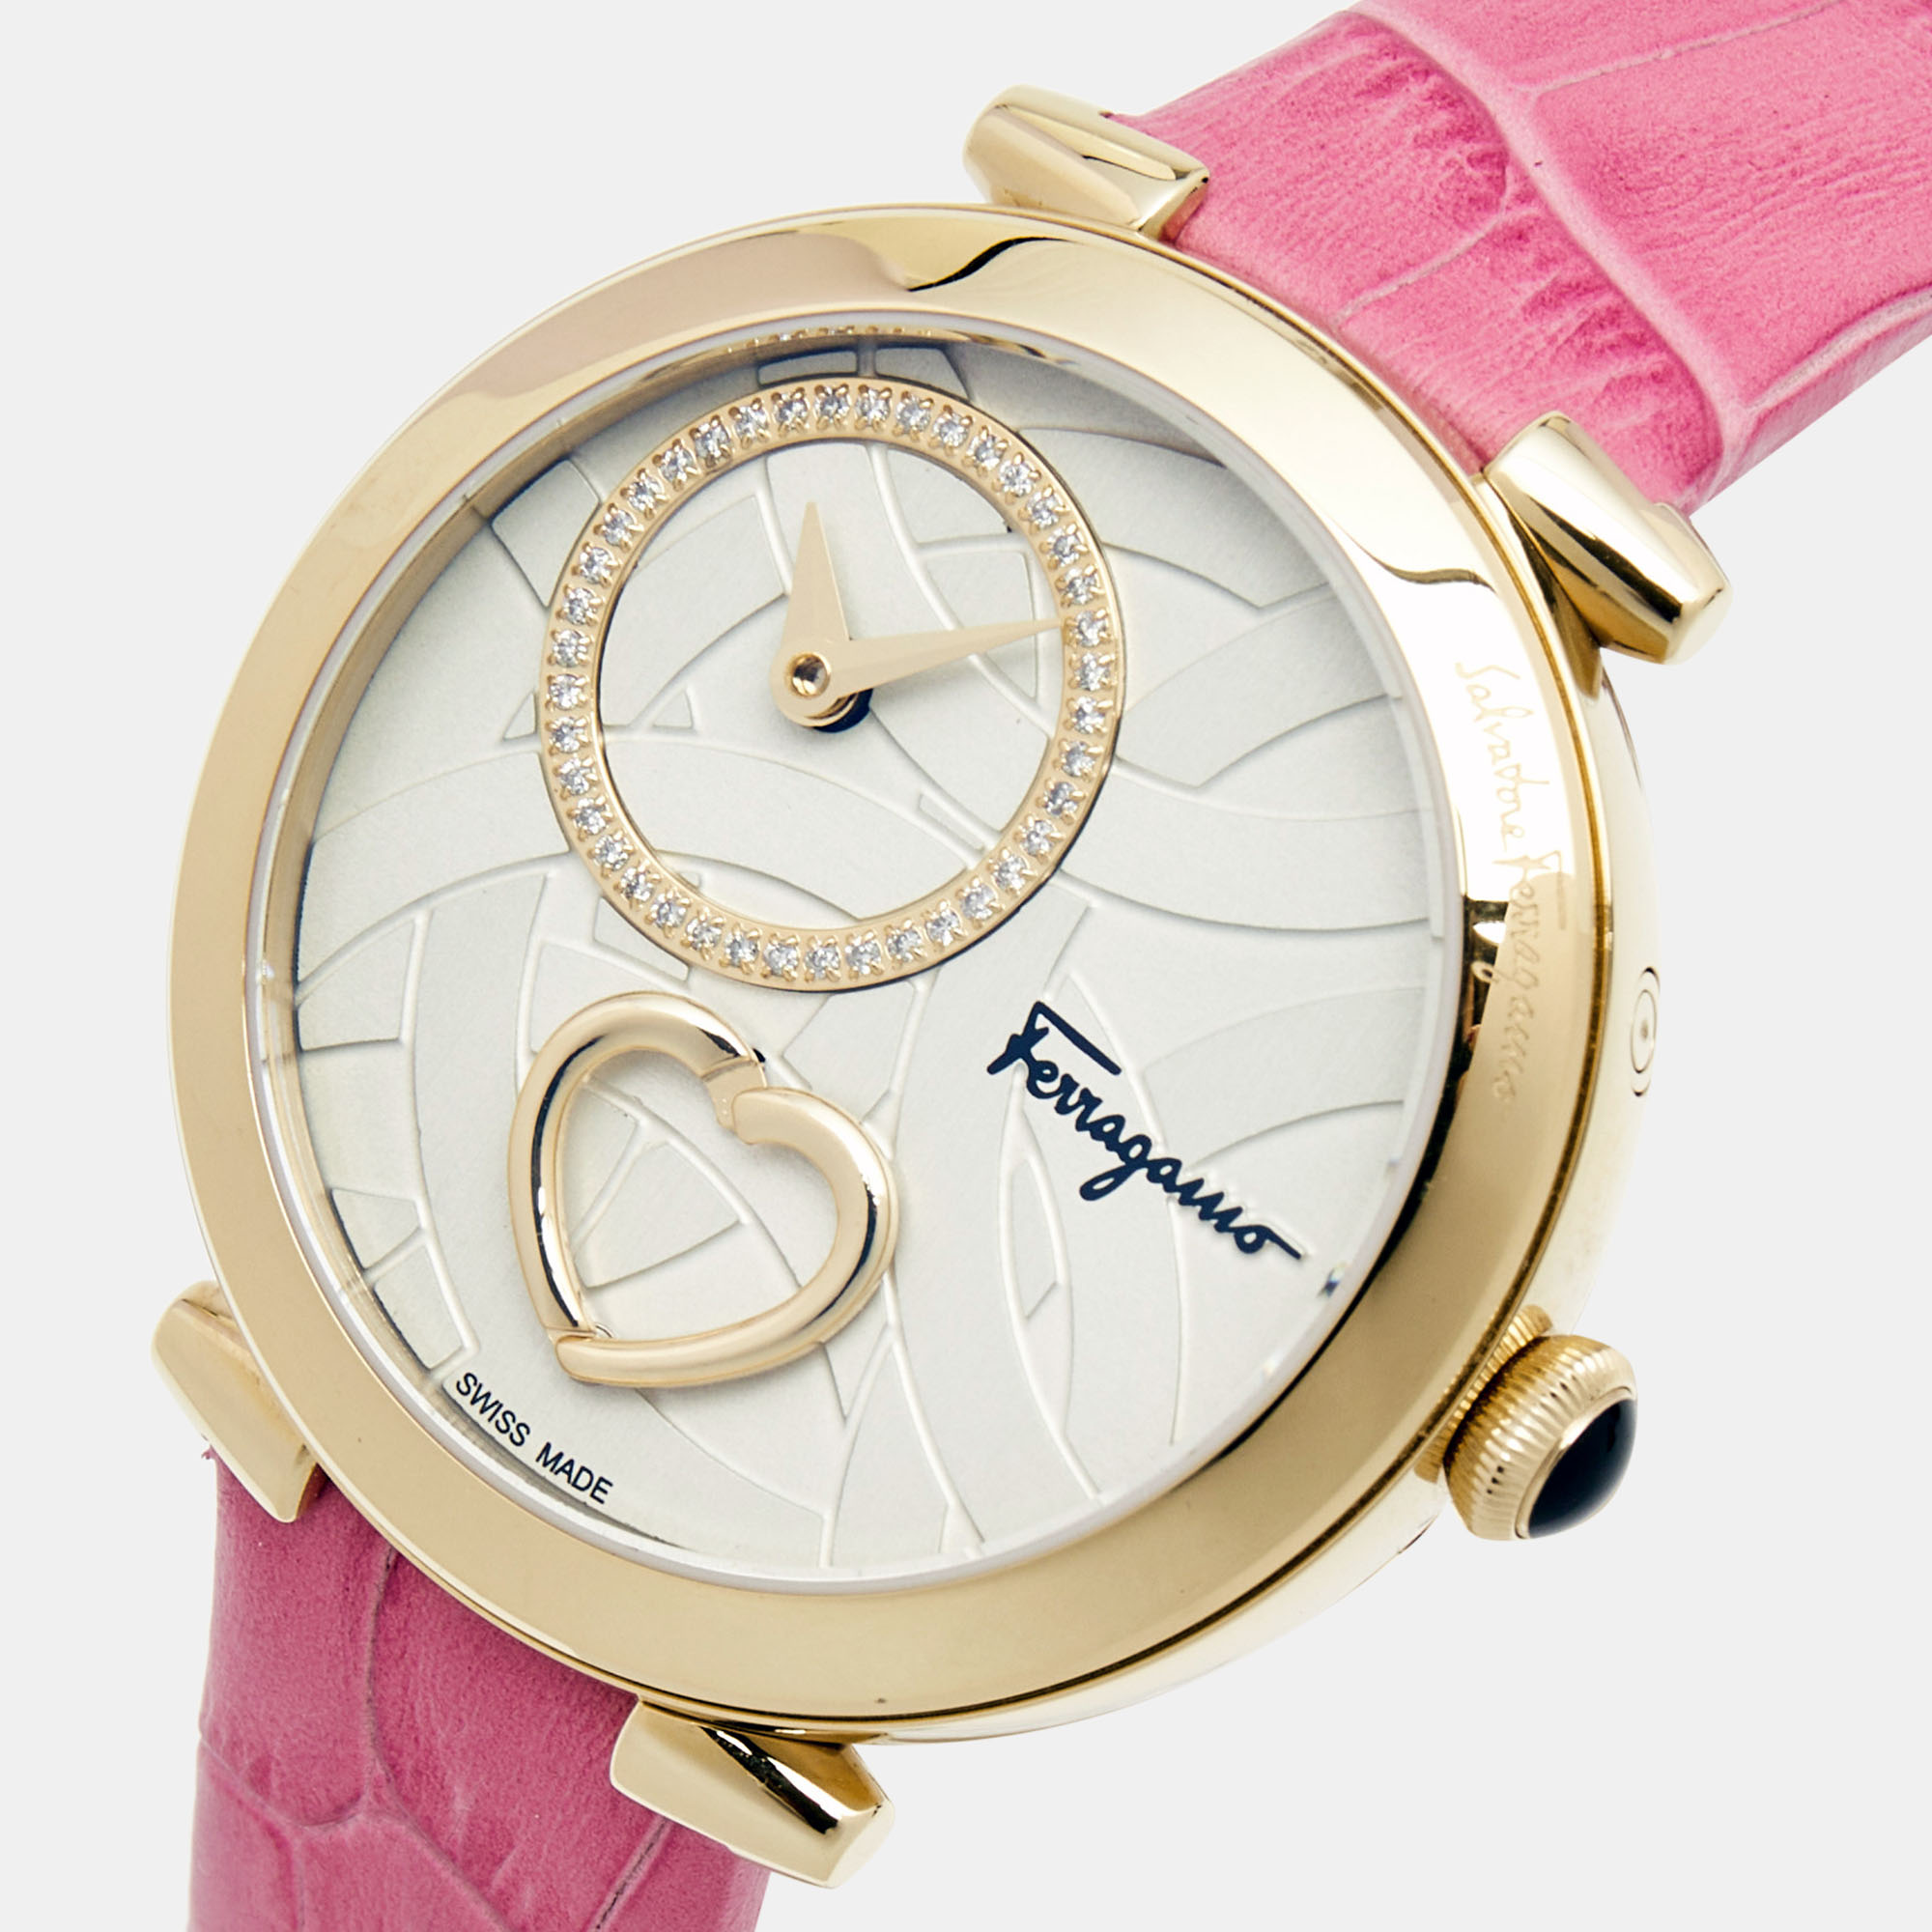 

Salvatore Ferragamo Cuore Beating Heart Gold Tone Stainless Steel Leather FE2040016 Women's Wristwatch, Pink